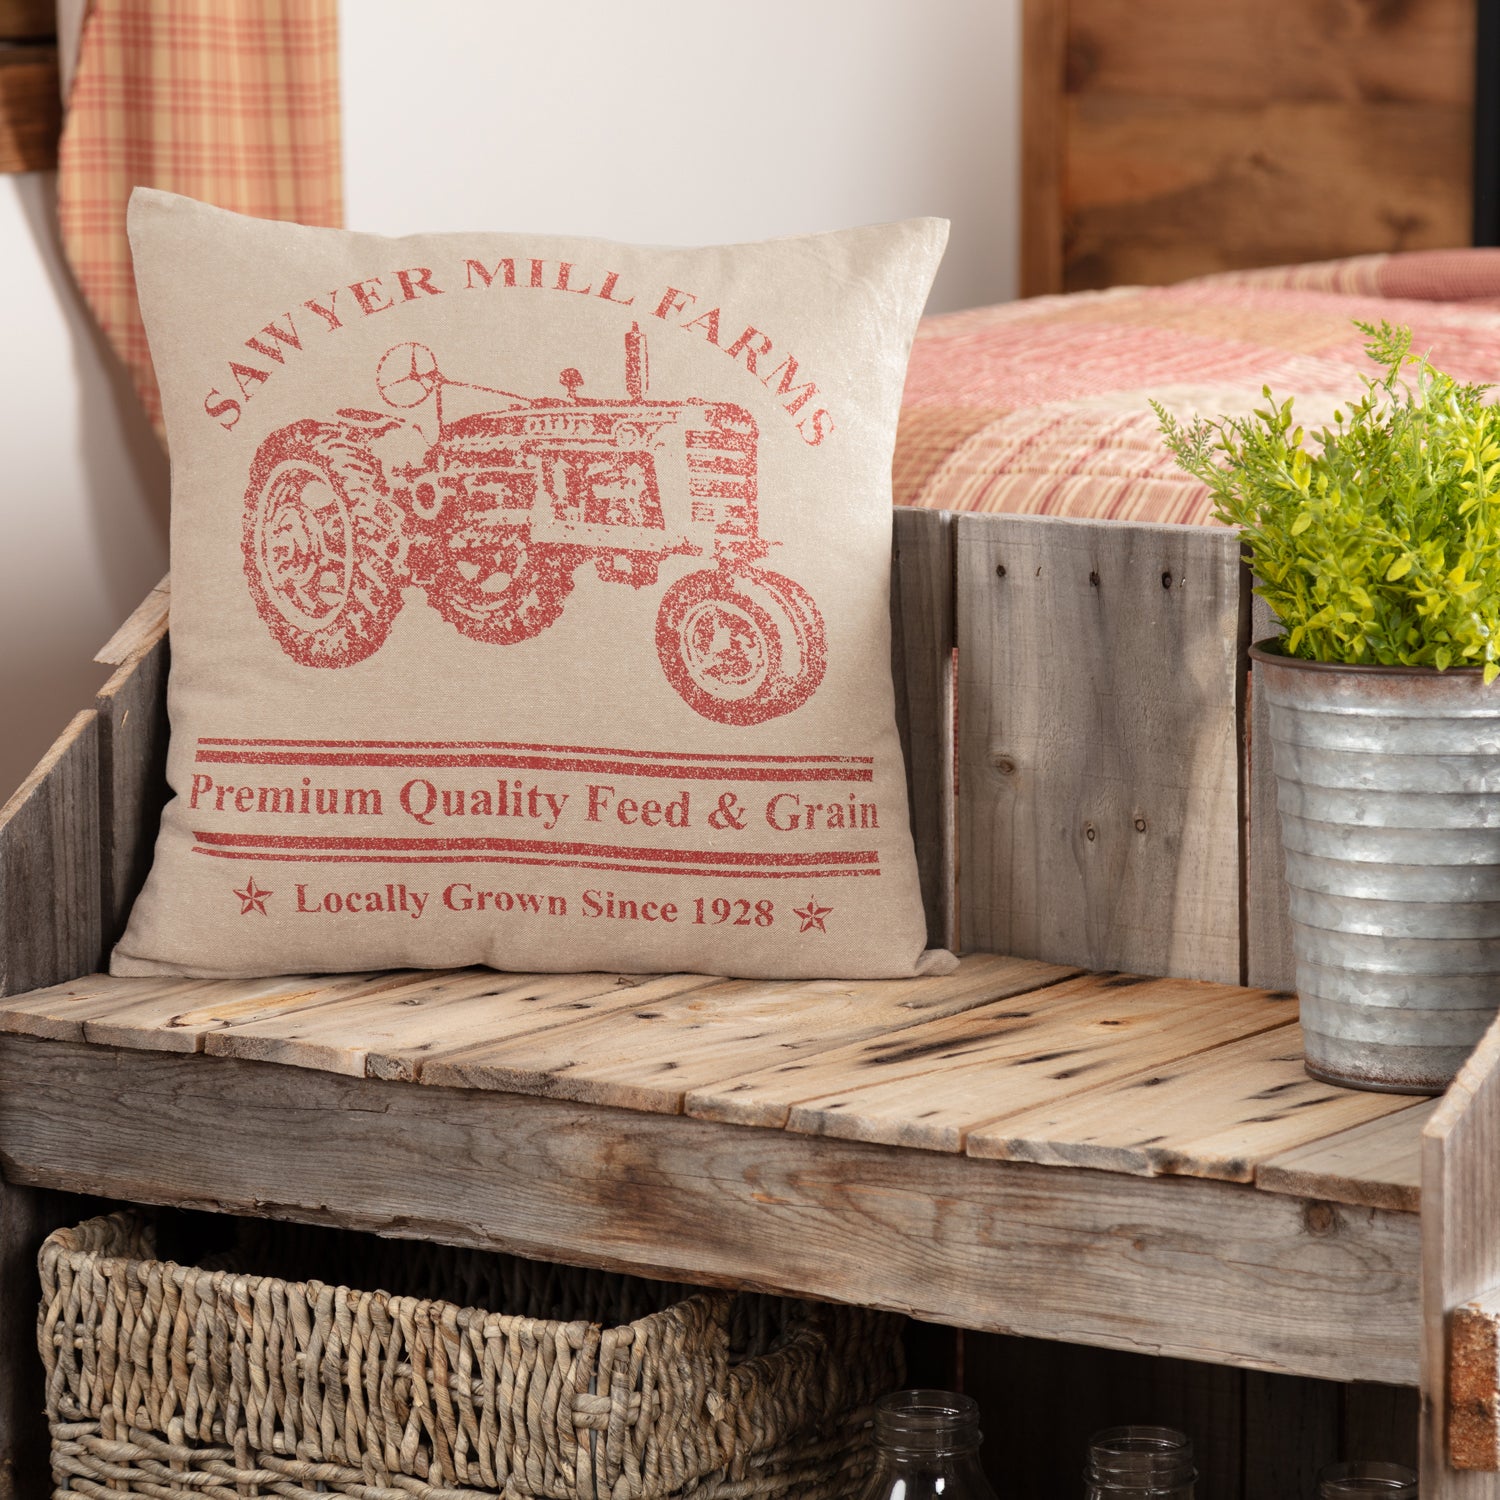 51325-Sawyer-Mill-Red-Tractor-Pillow-18x18-image-3